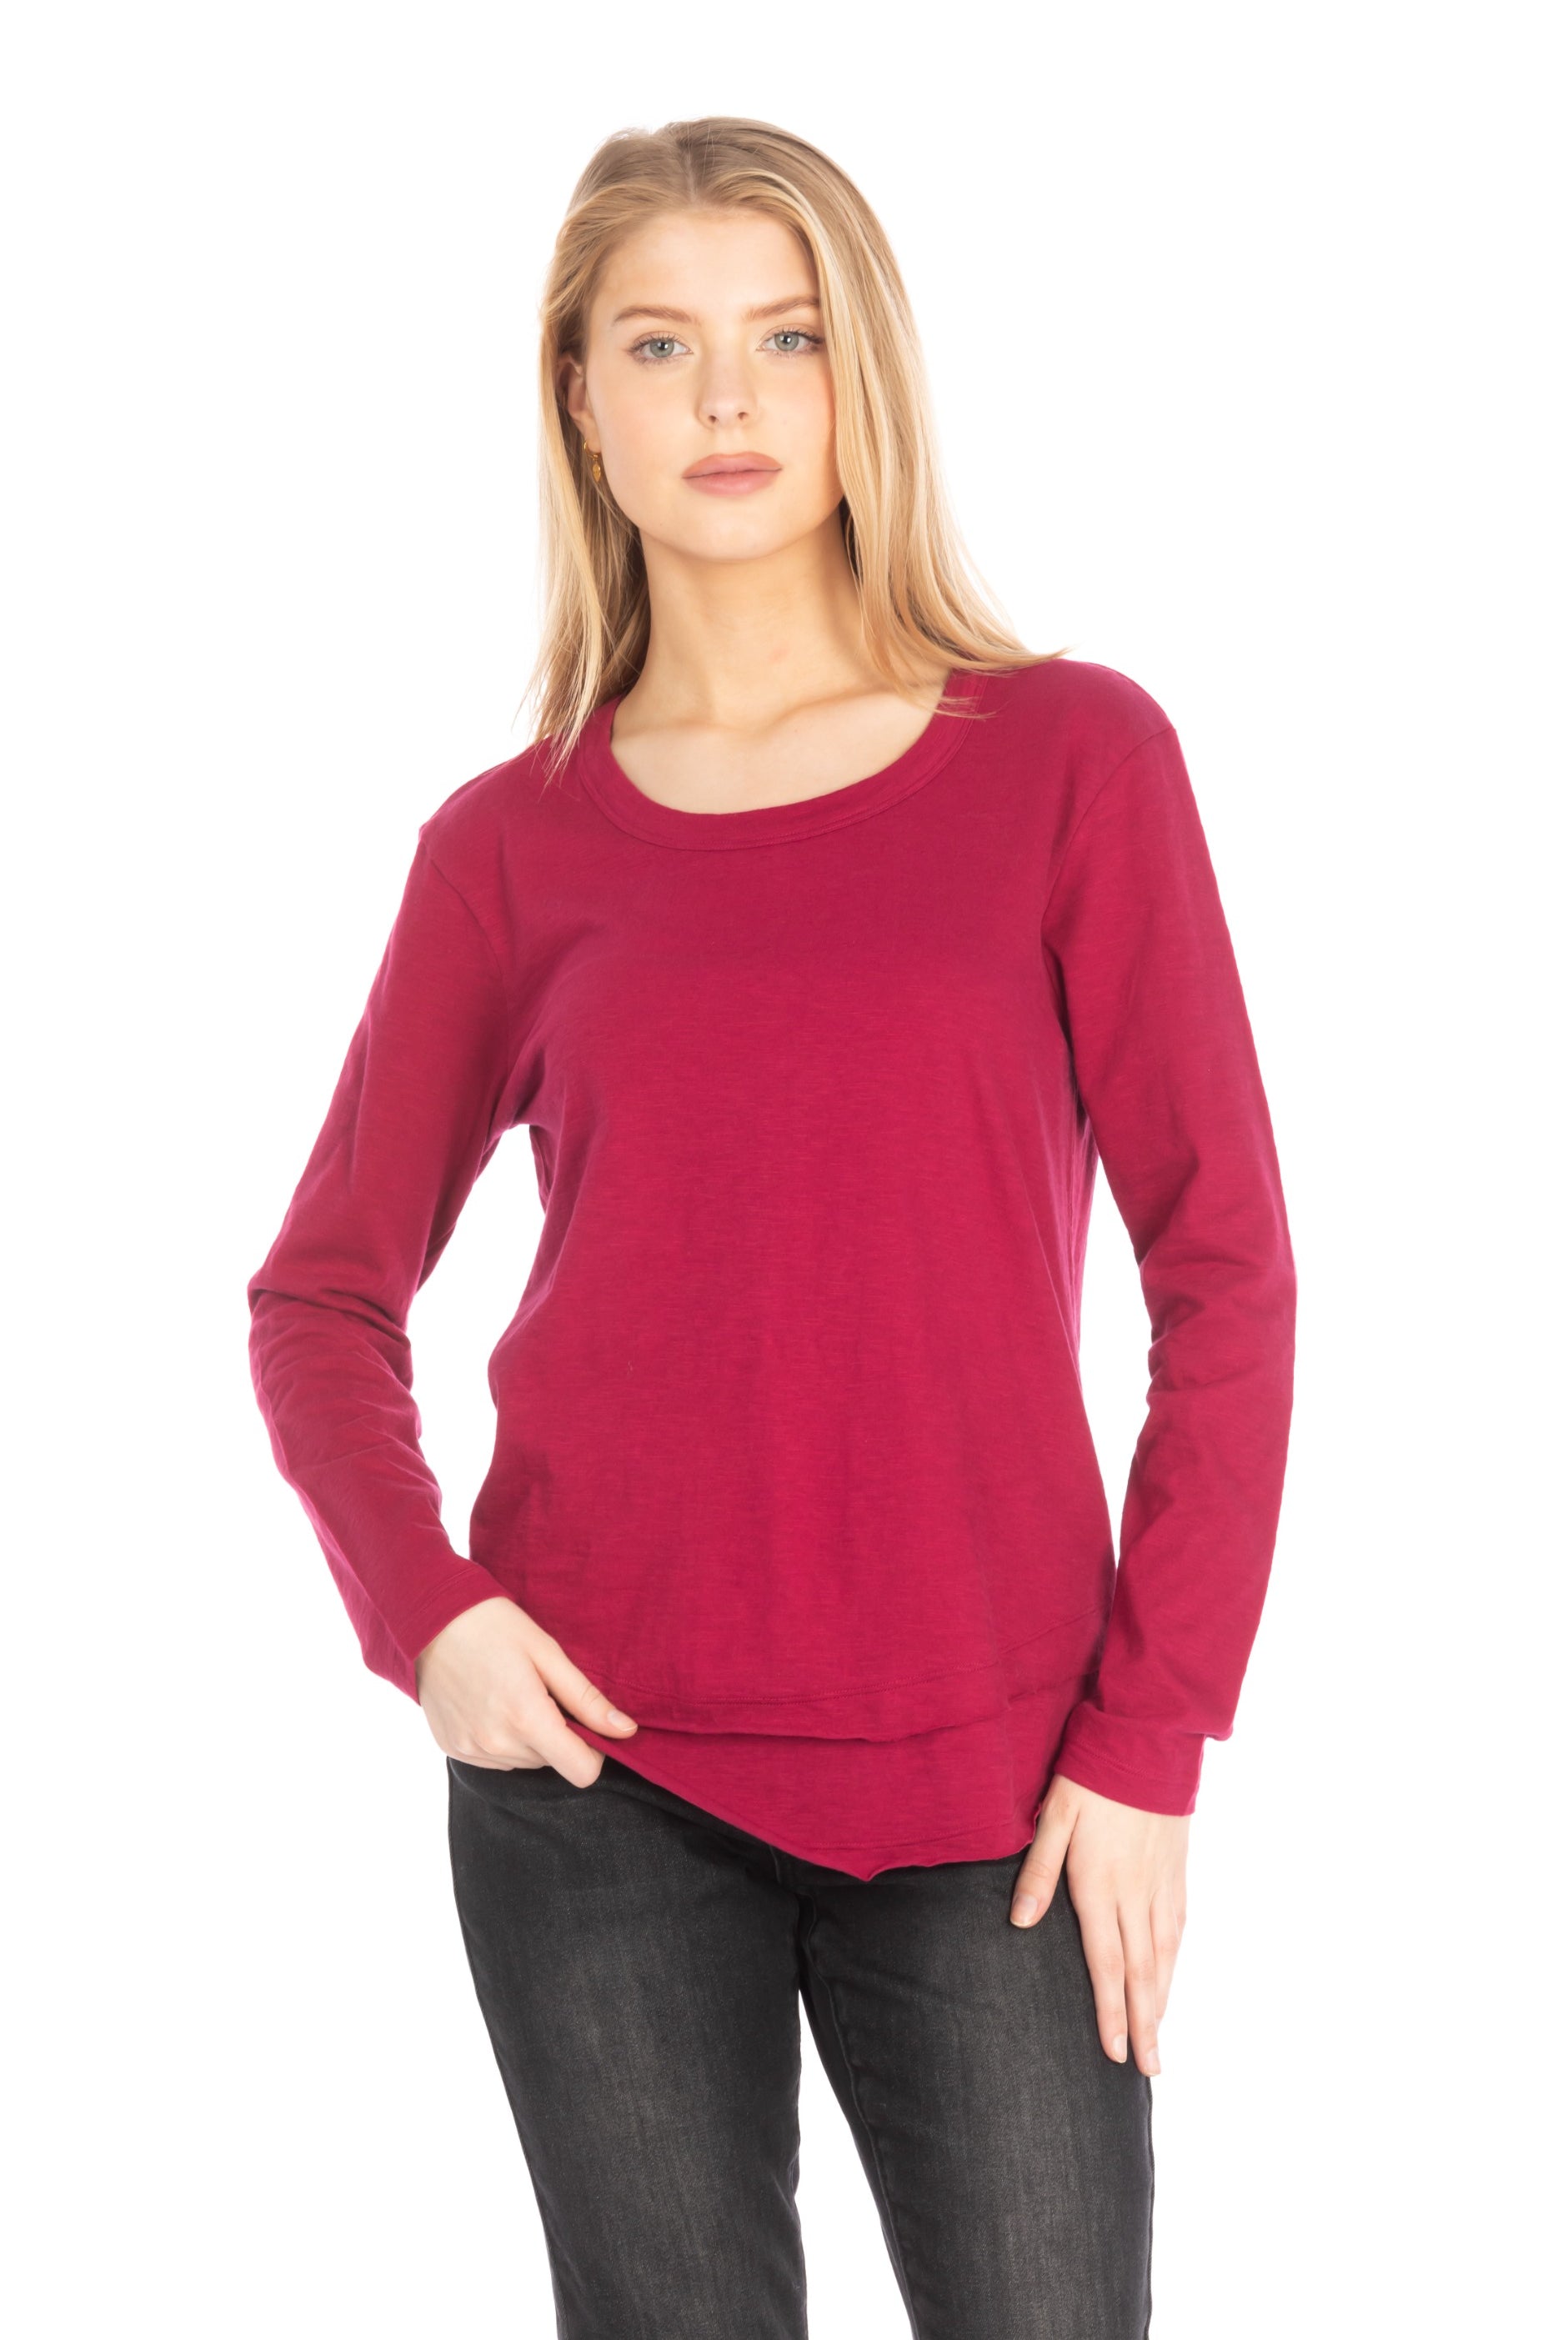 Long Sleeve With Asymmetrical Hem Red Front-2 APNY